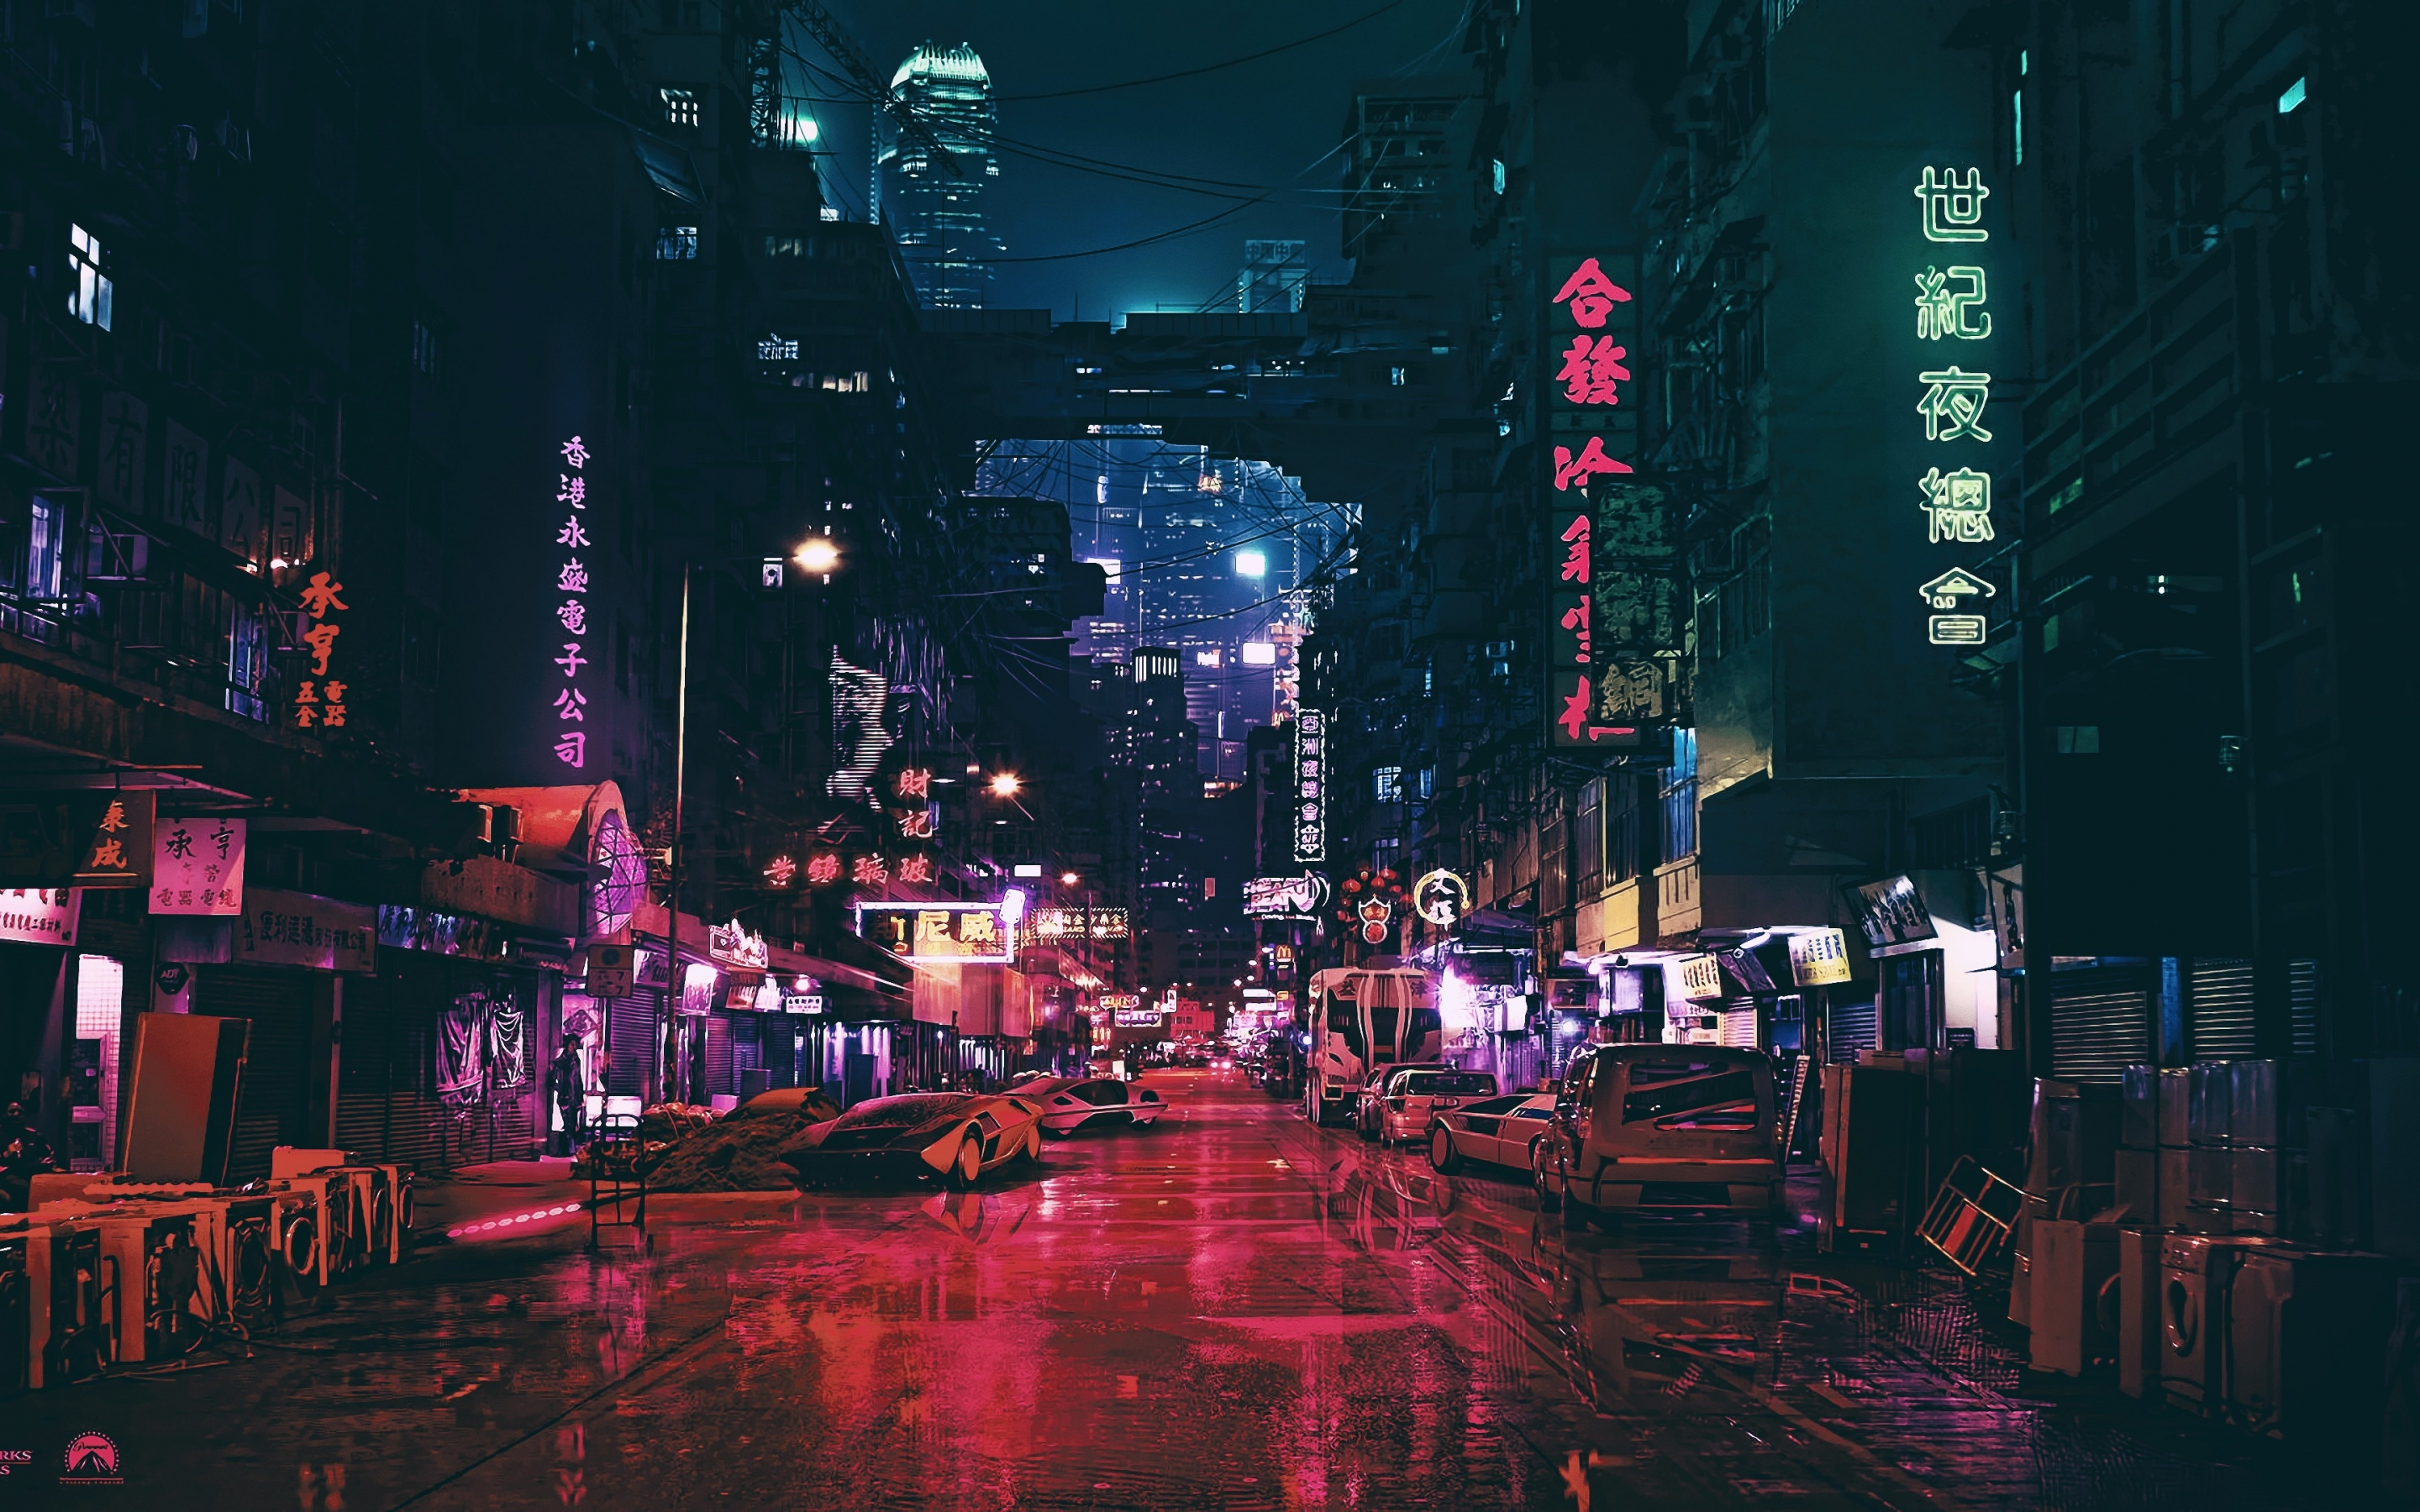 Ghost in the shell, city, movie, 2880x1800 wallpaper